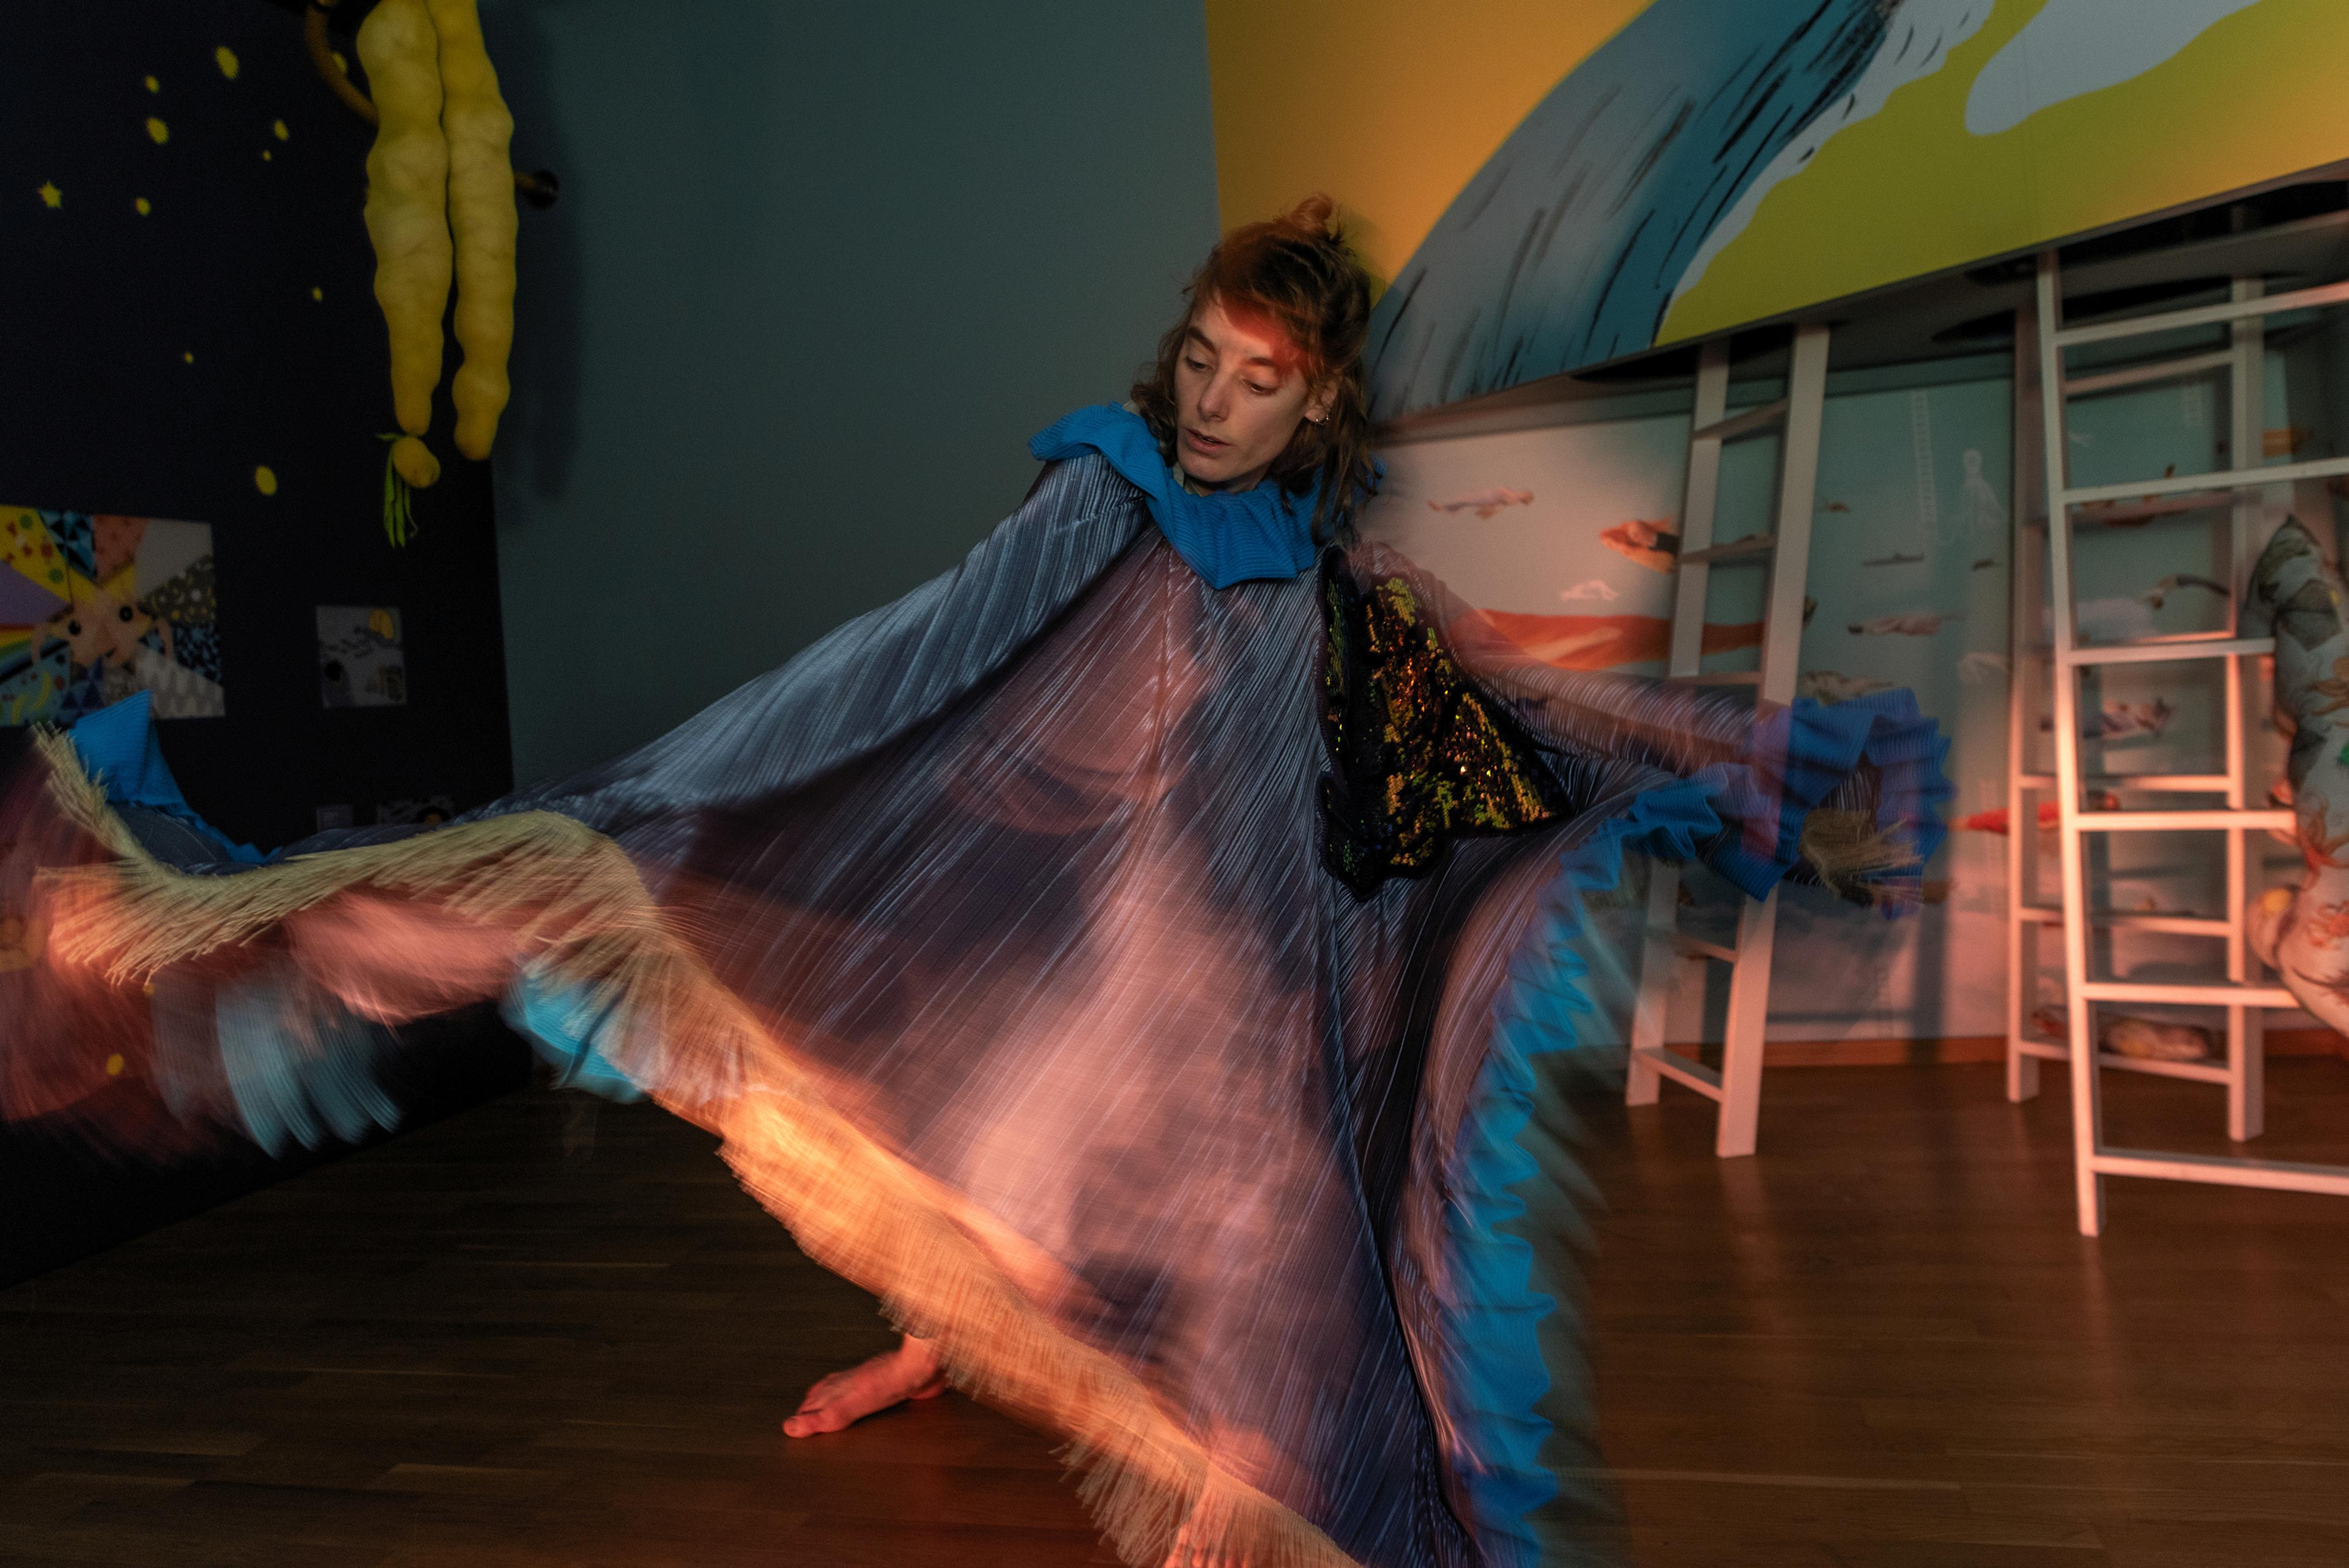 A woman dancing and performing in a colorful dress, in an exhibition for children